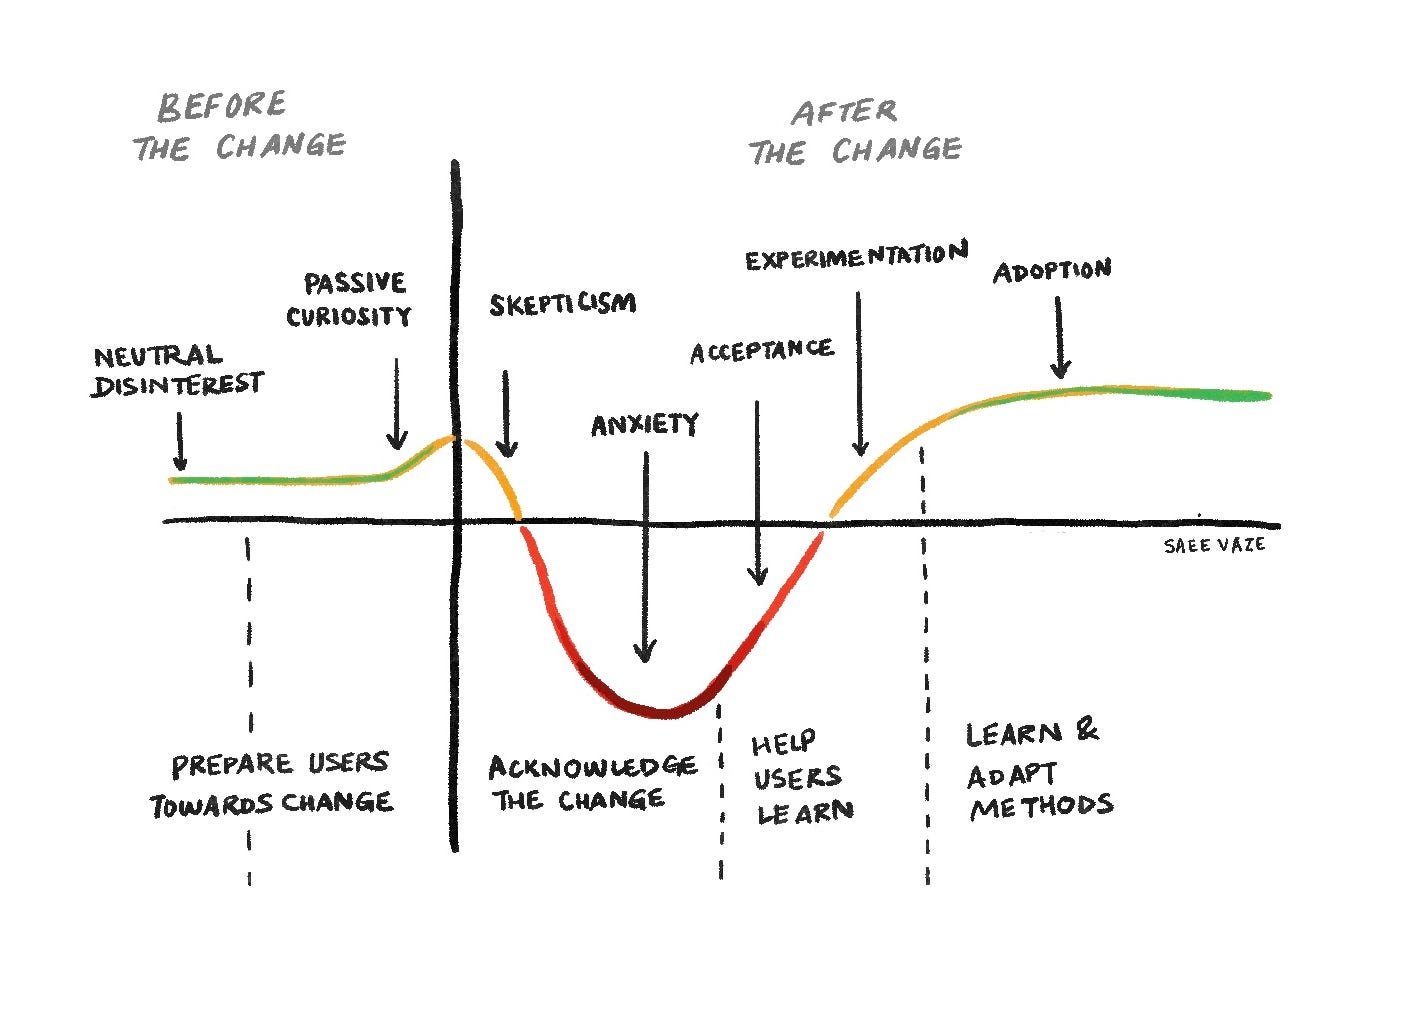 A diagram showing how users’ emotions dip to negative for some time right after a change is introduced to them.